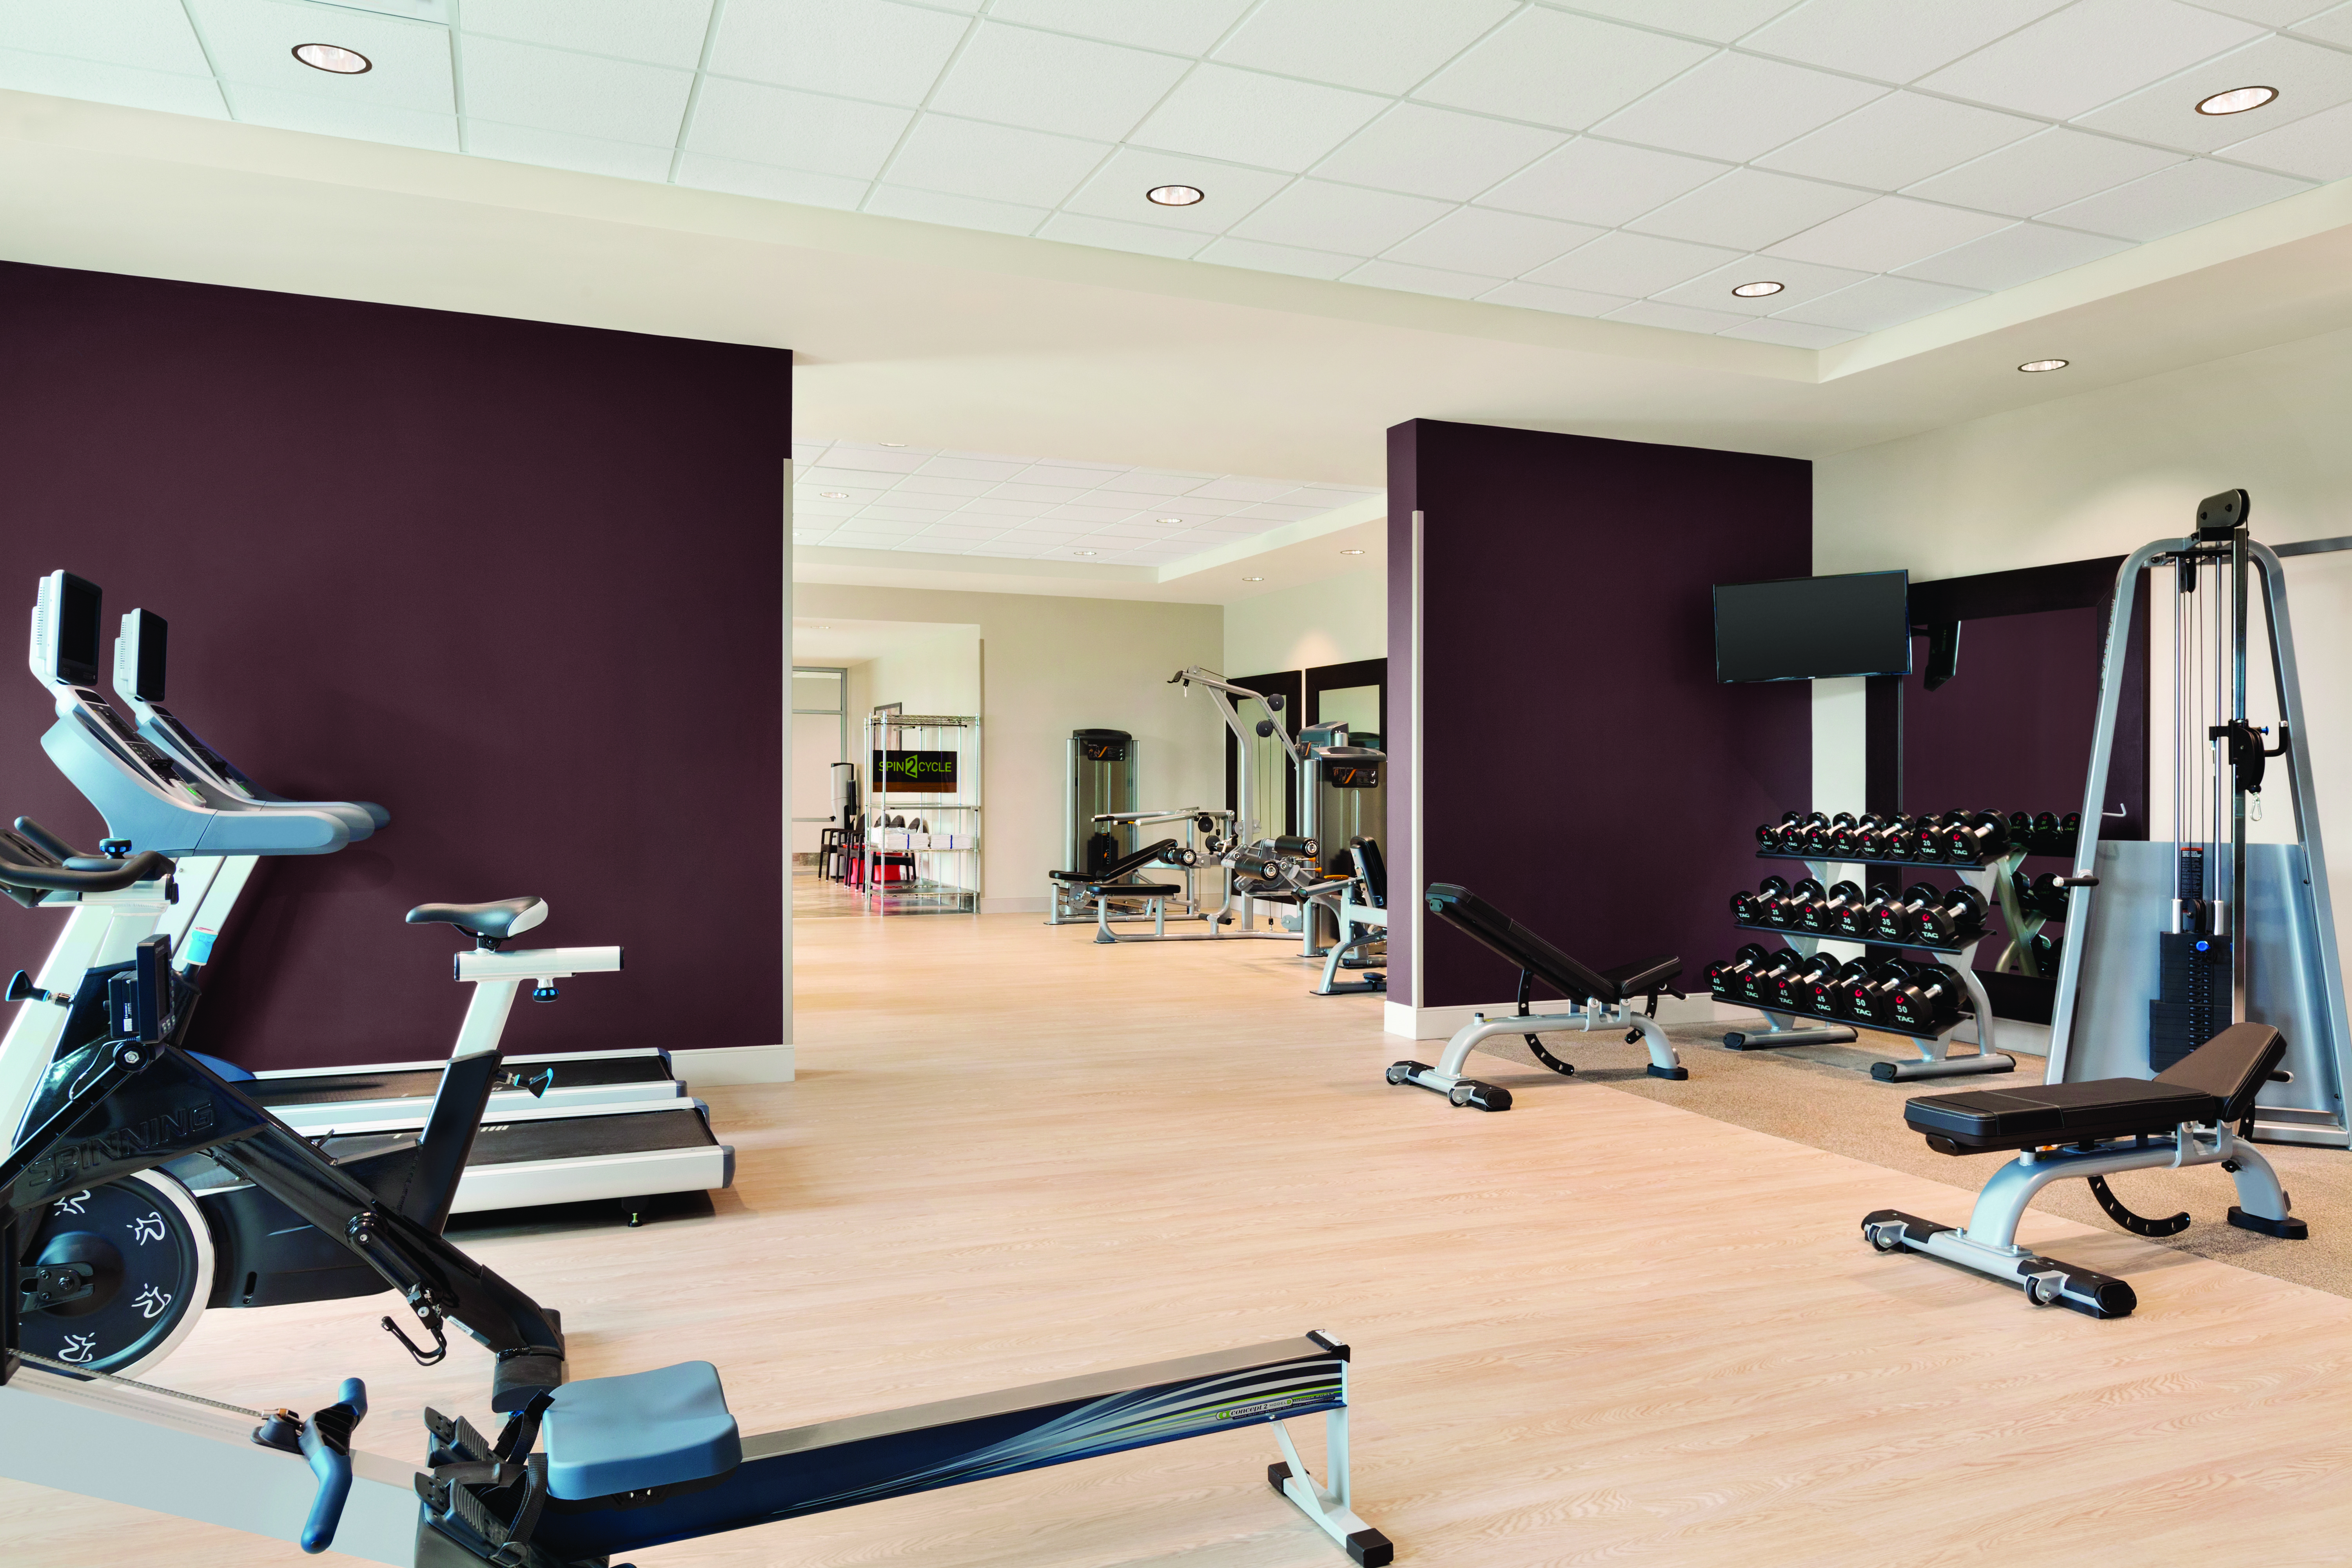 Fitness Center with Rowing Machine, Treadmills, Dumbbell Rack and Weight Bench